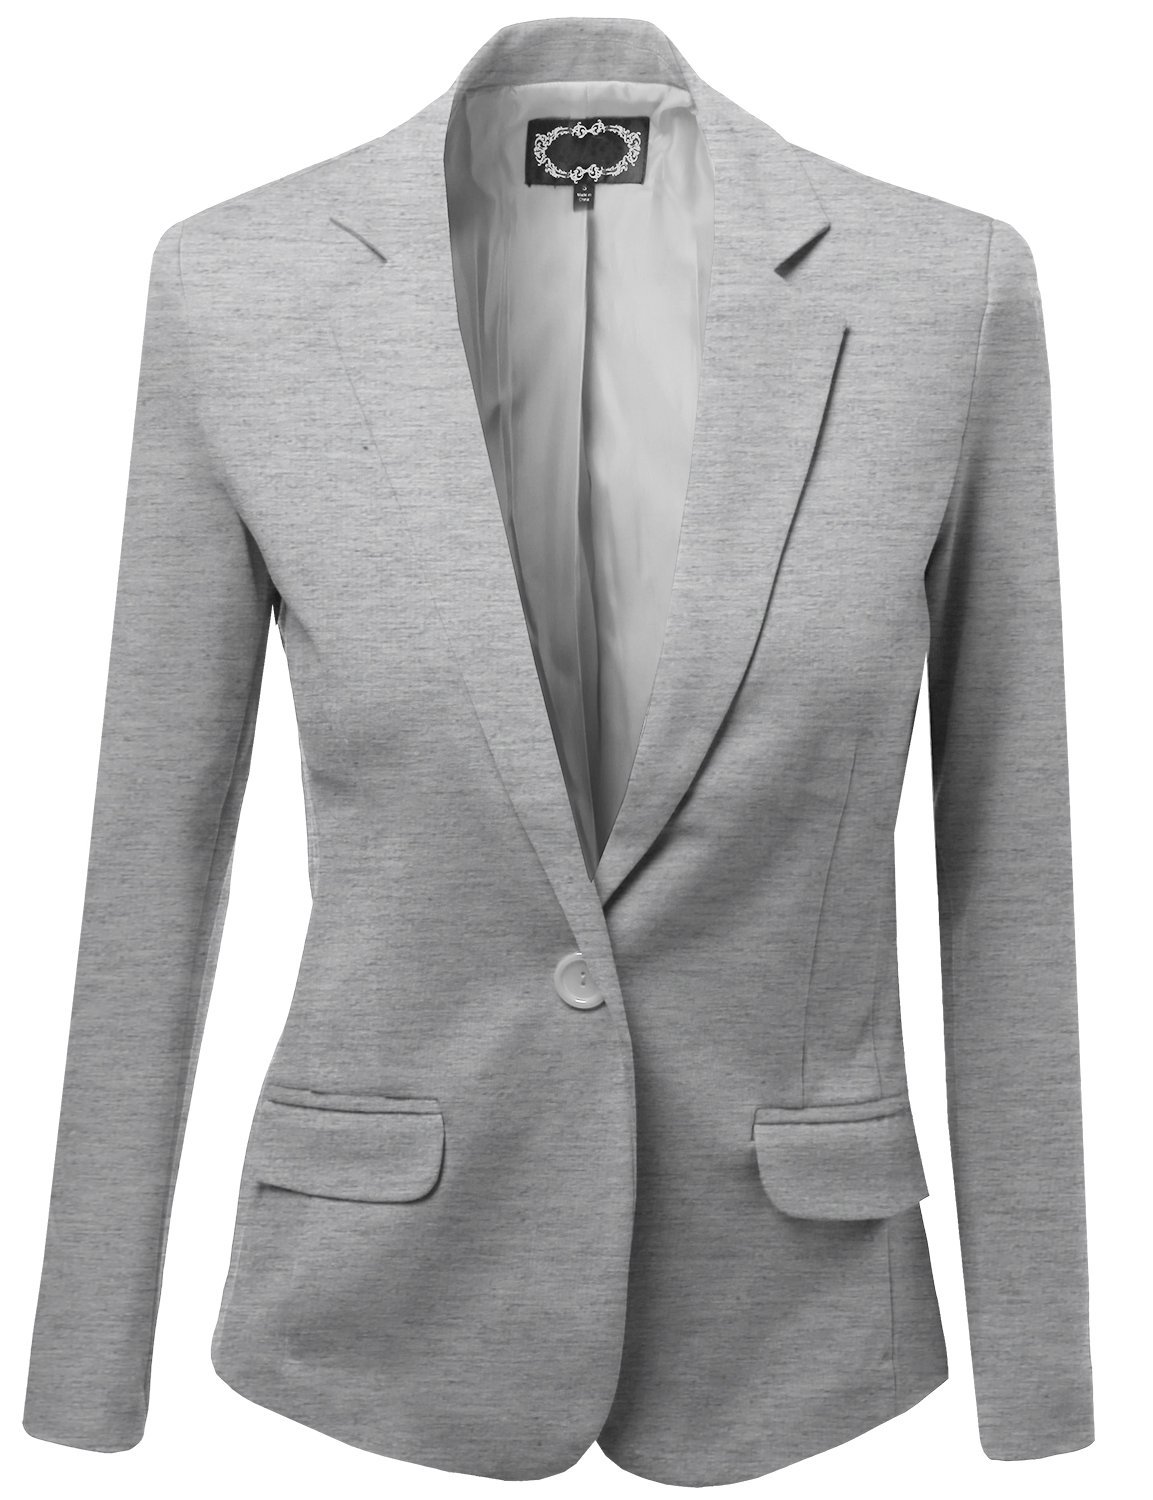 Awesome21 Women's Basic Solid Slim Fit One Button Blazers